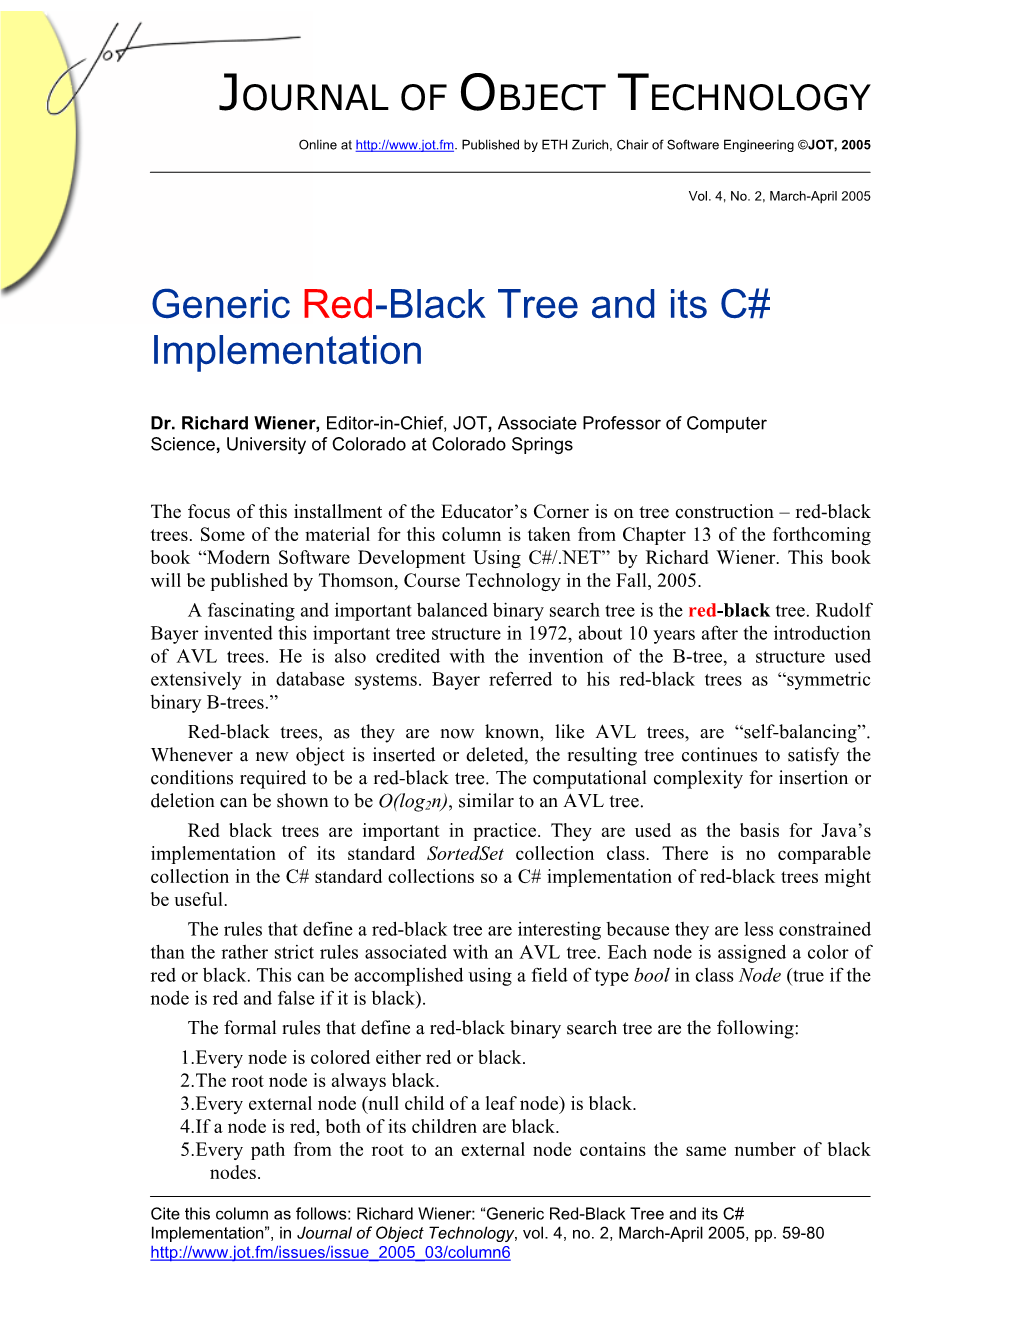 Generic Red-Black Tree and Its C# Implementation